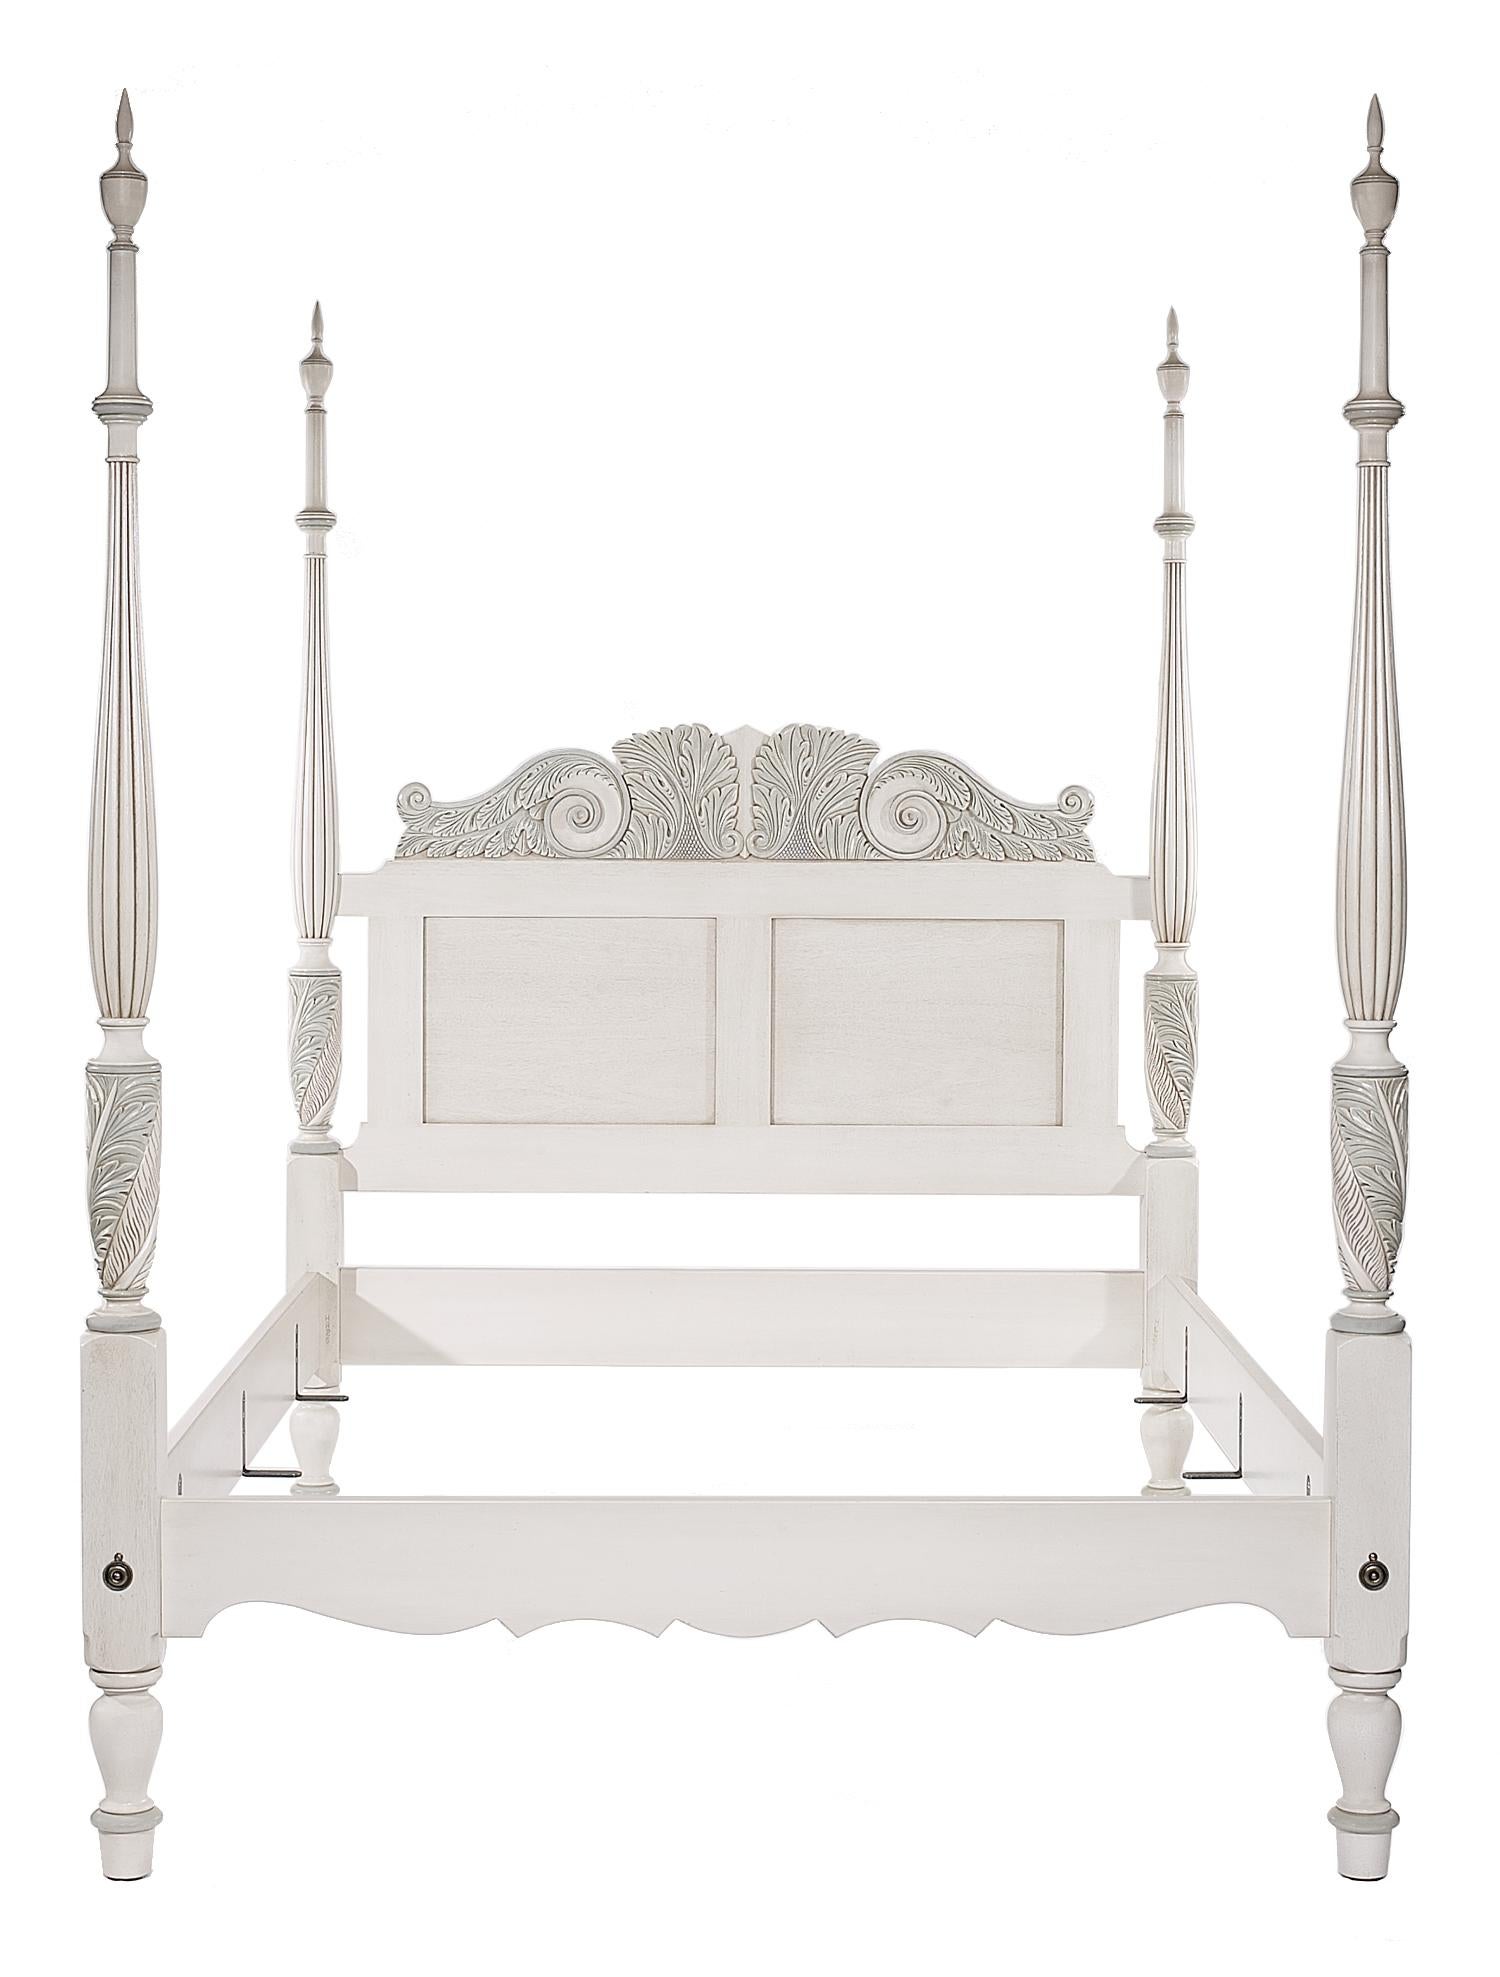 The Desiree is a masterclass in craft with ornately carved and reeded bed posts available with and without a canopy. The front rail is scalloped to mimic the headboard profile. Made of mahogany this piece will make a dramatic statement in any